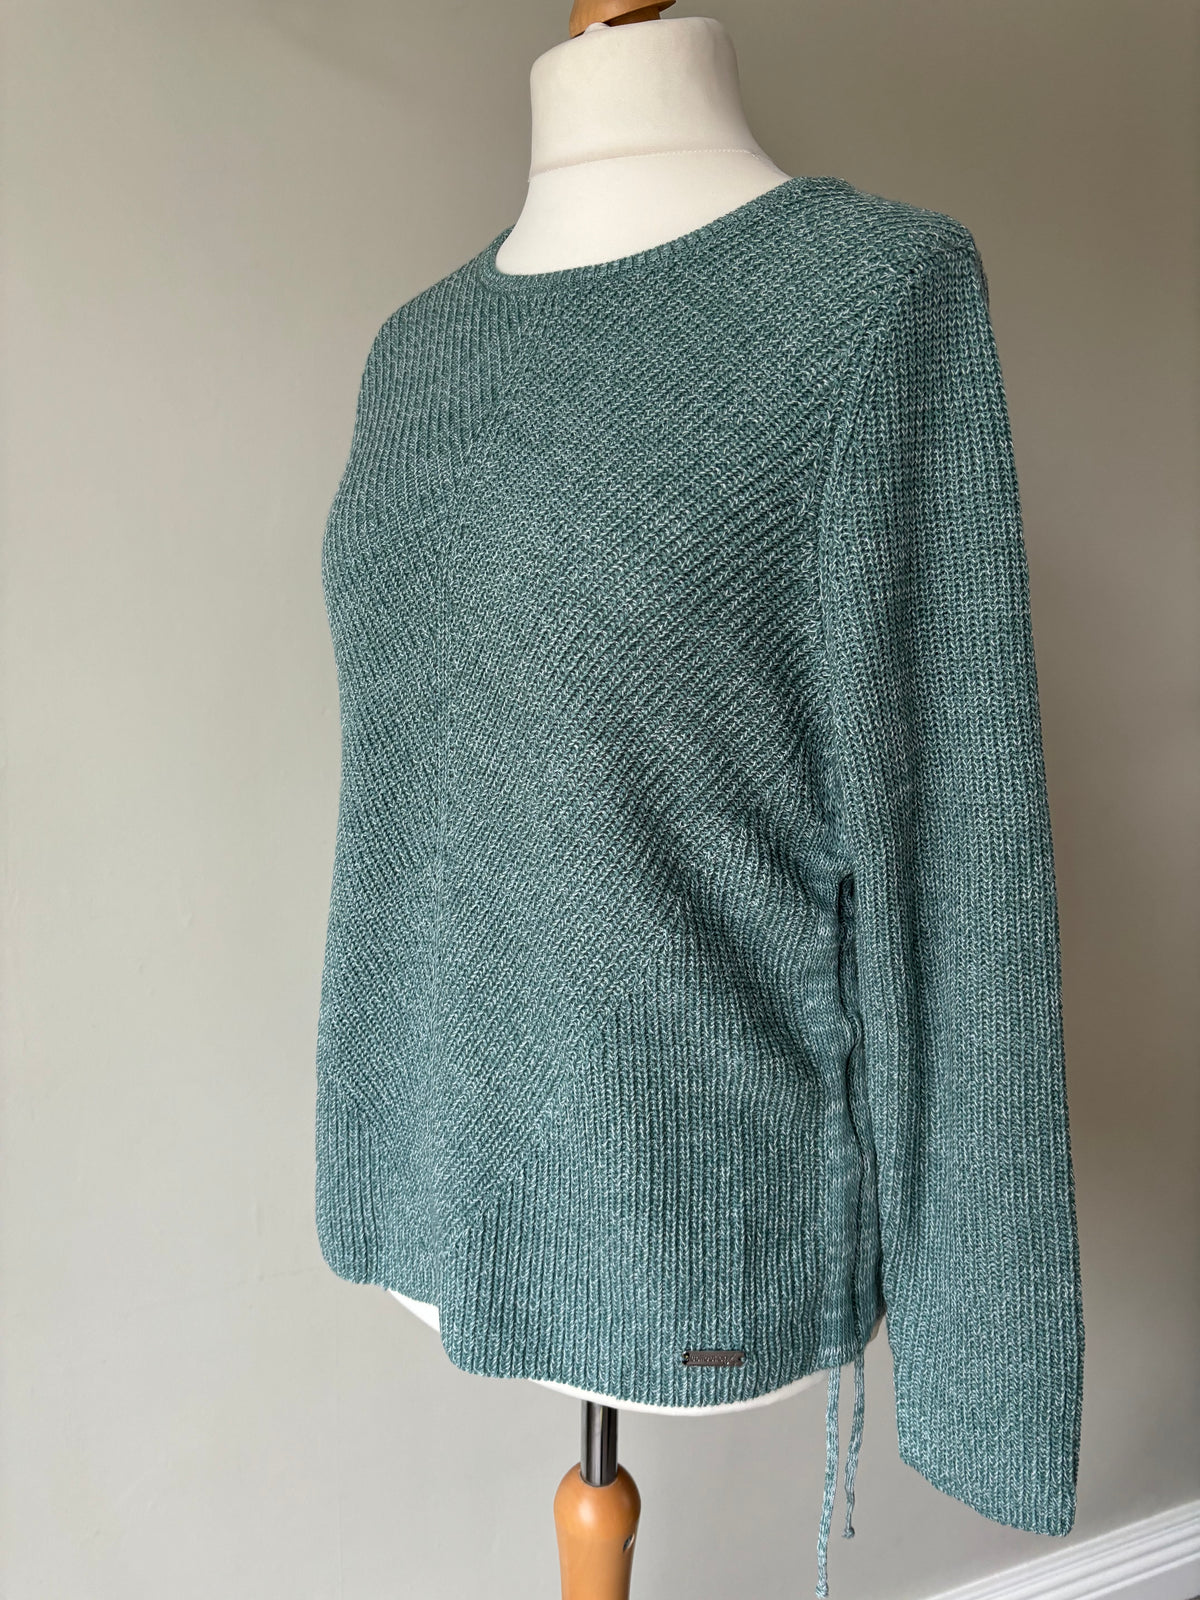 Green knit jumper with side ties by Creation L Size 16